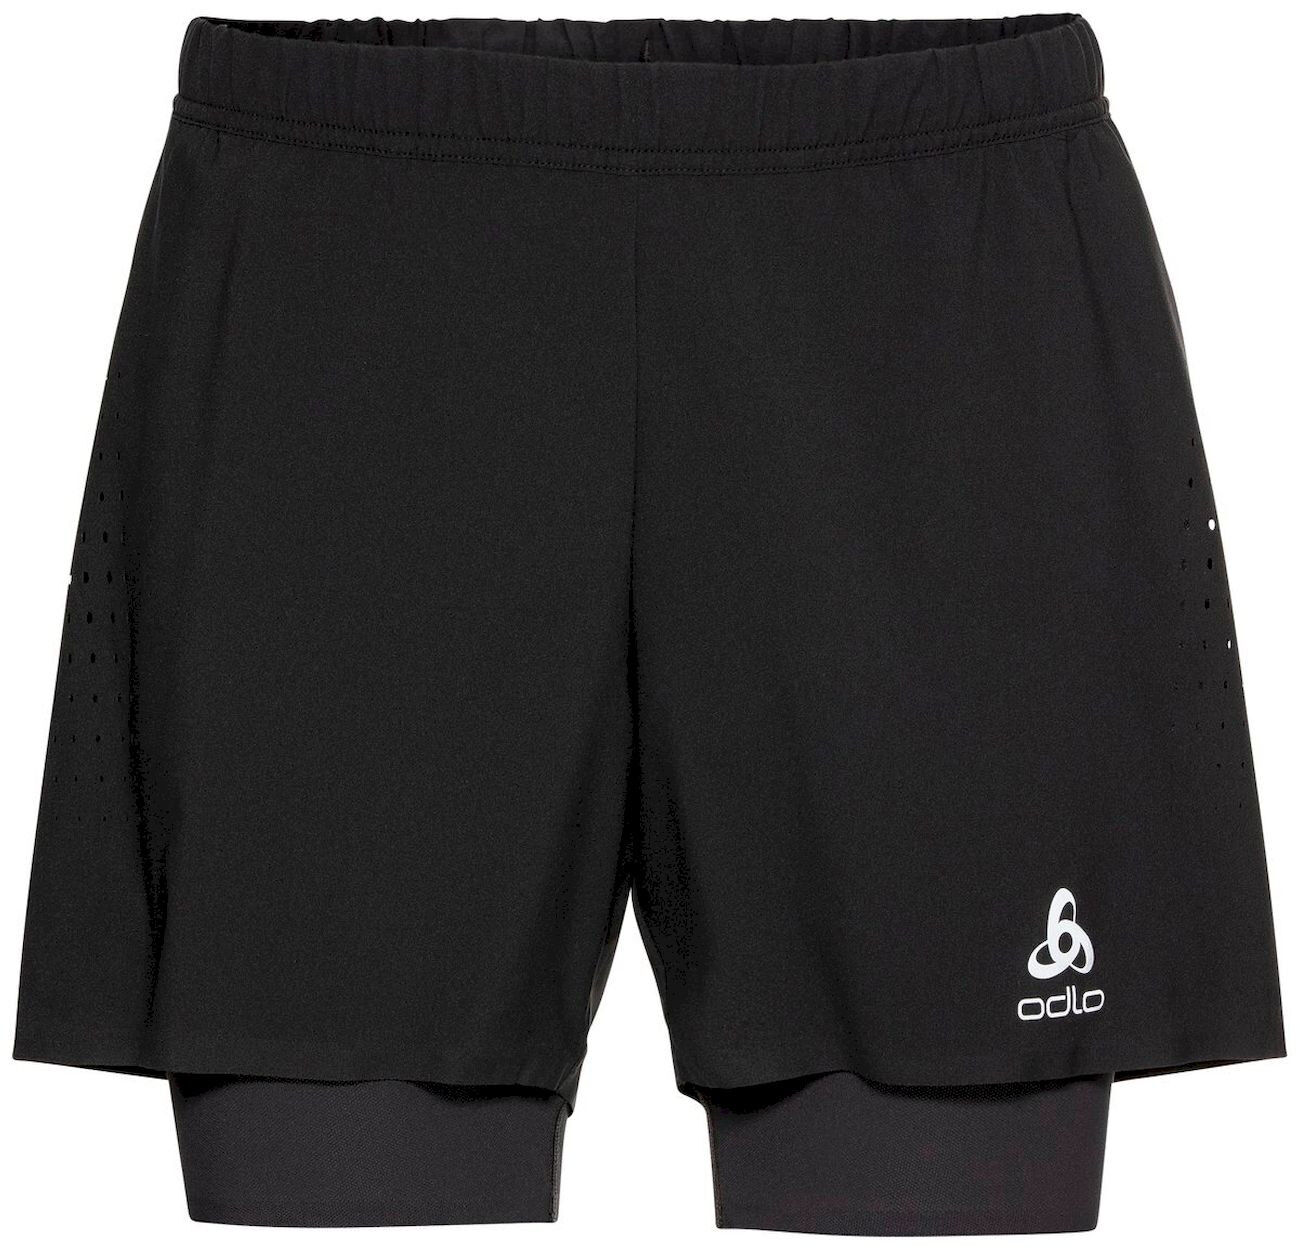 Odlo 2-In-1 Zeroweight 5 Inch - Laufshorts